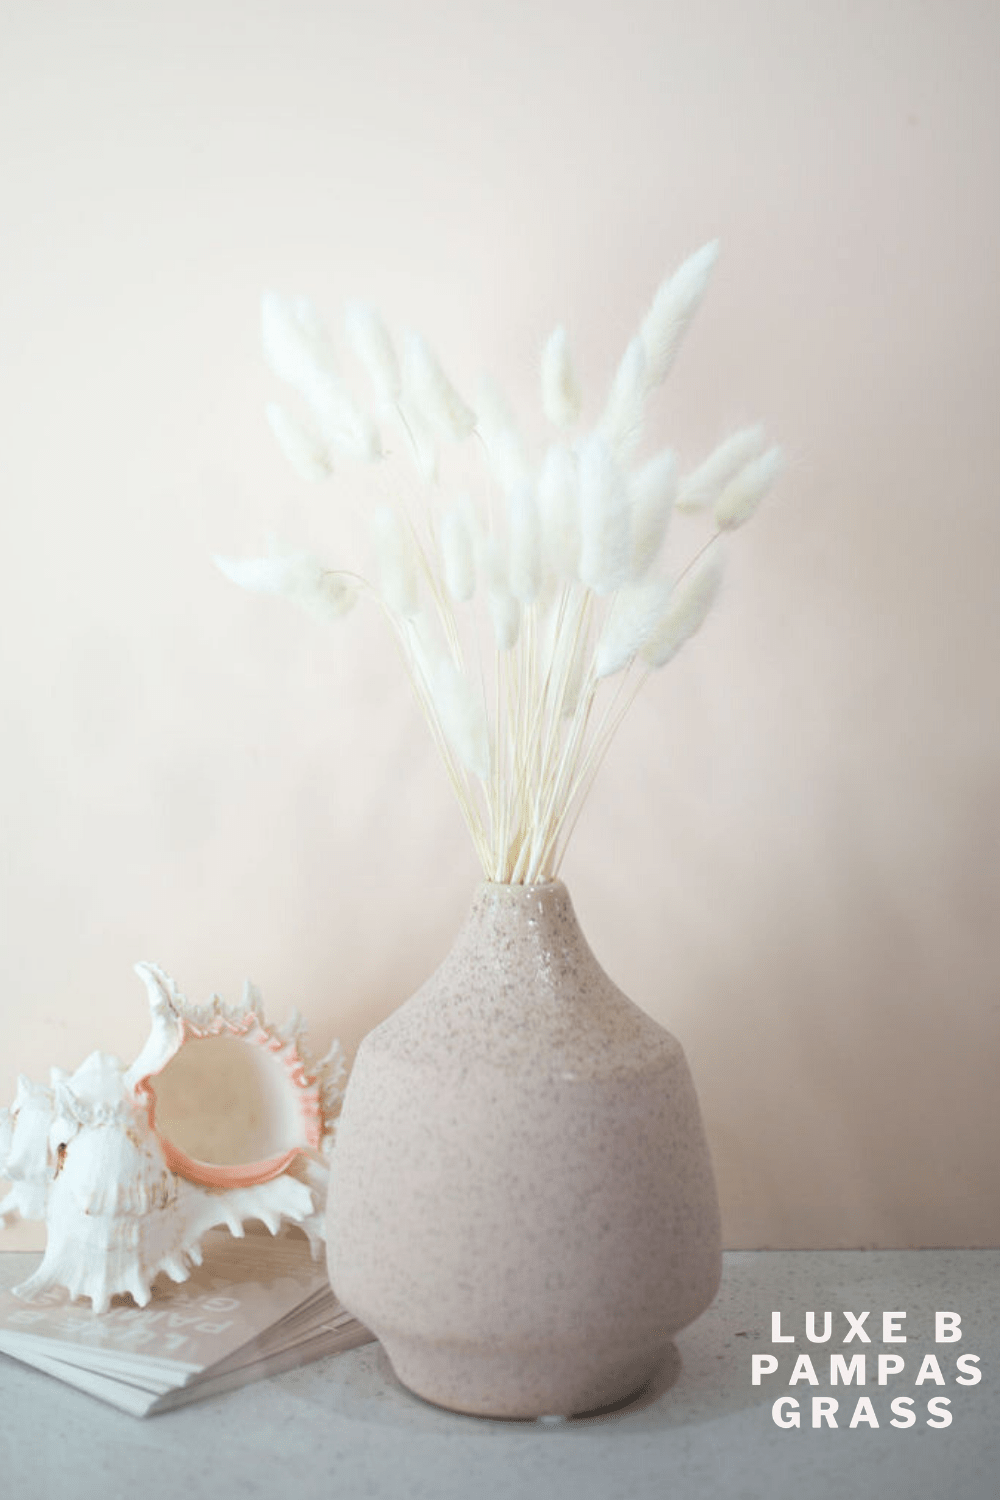 Bunny tails in colour bleach white - Luxe B Co